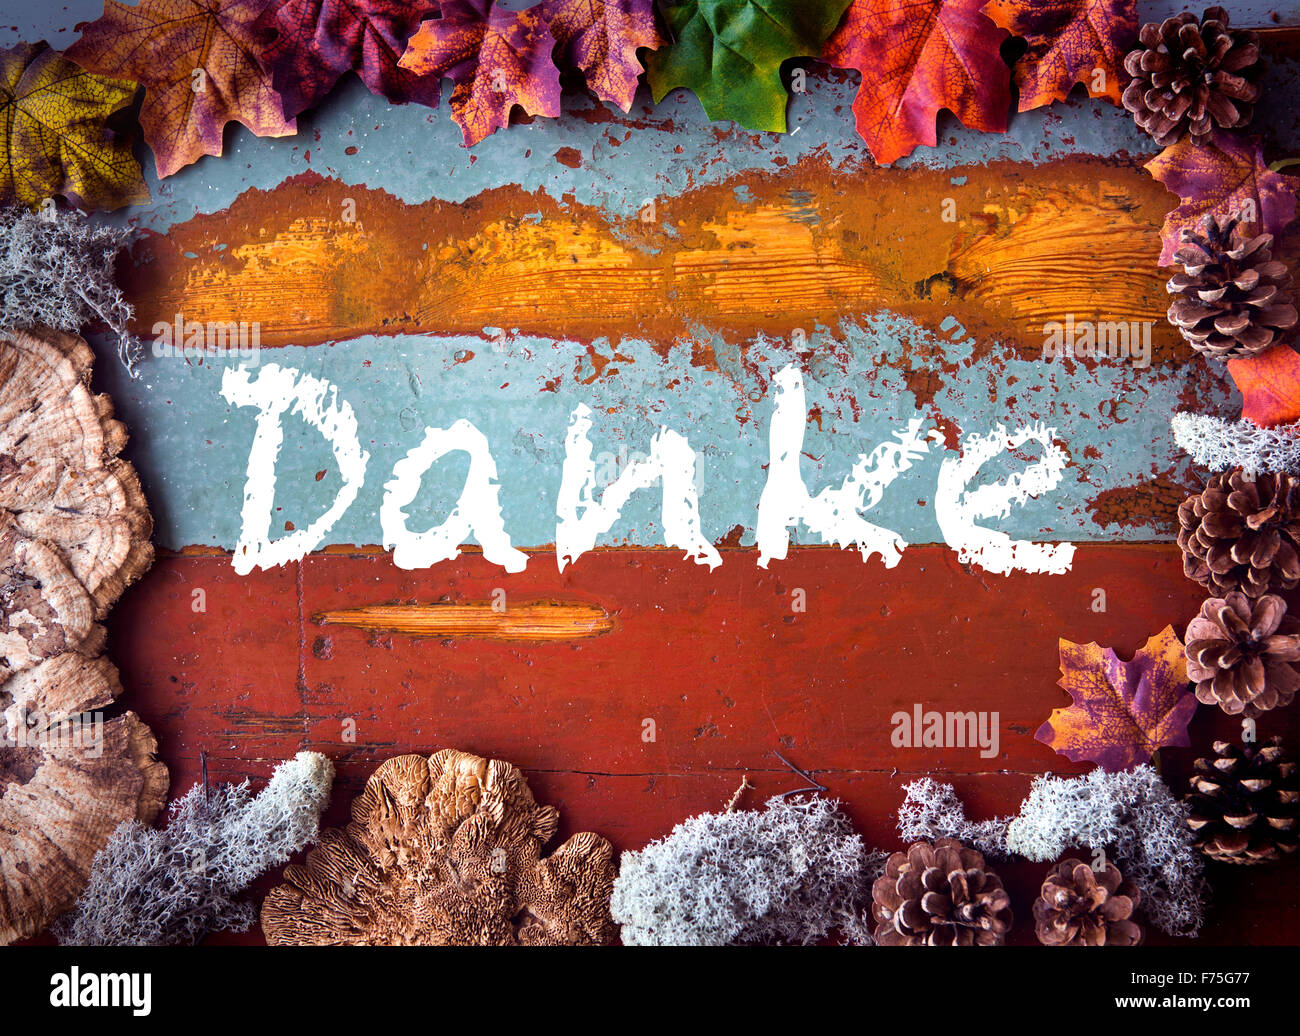 german word 'Danke' (thank you) written on wooden vintage board with pinecones and leaves Stock Photo